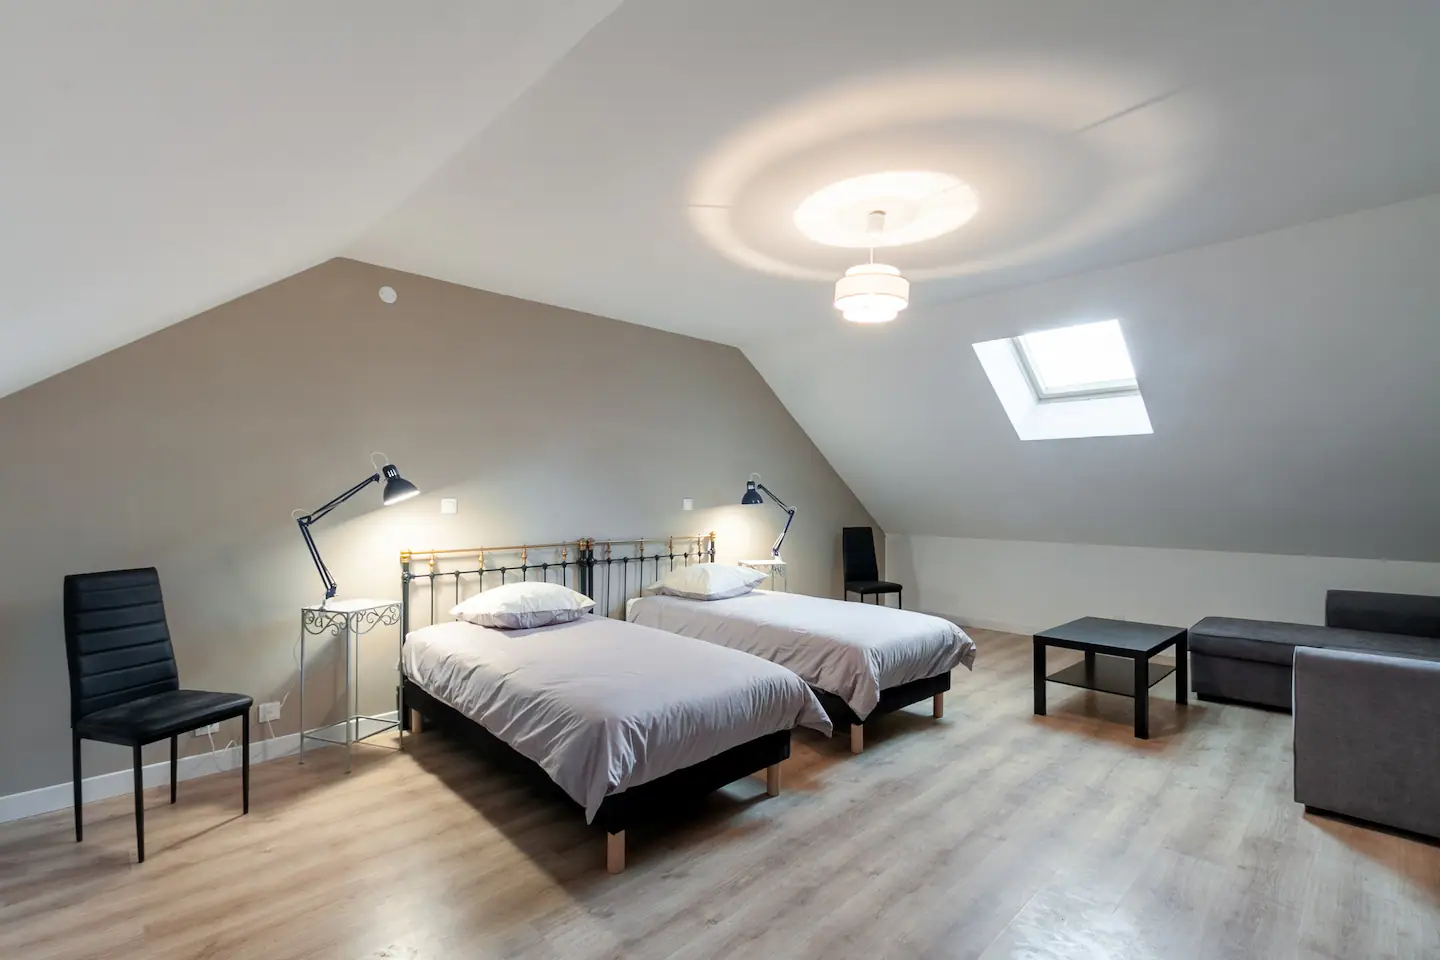 Spacious bedroom with a large double bed